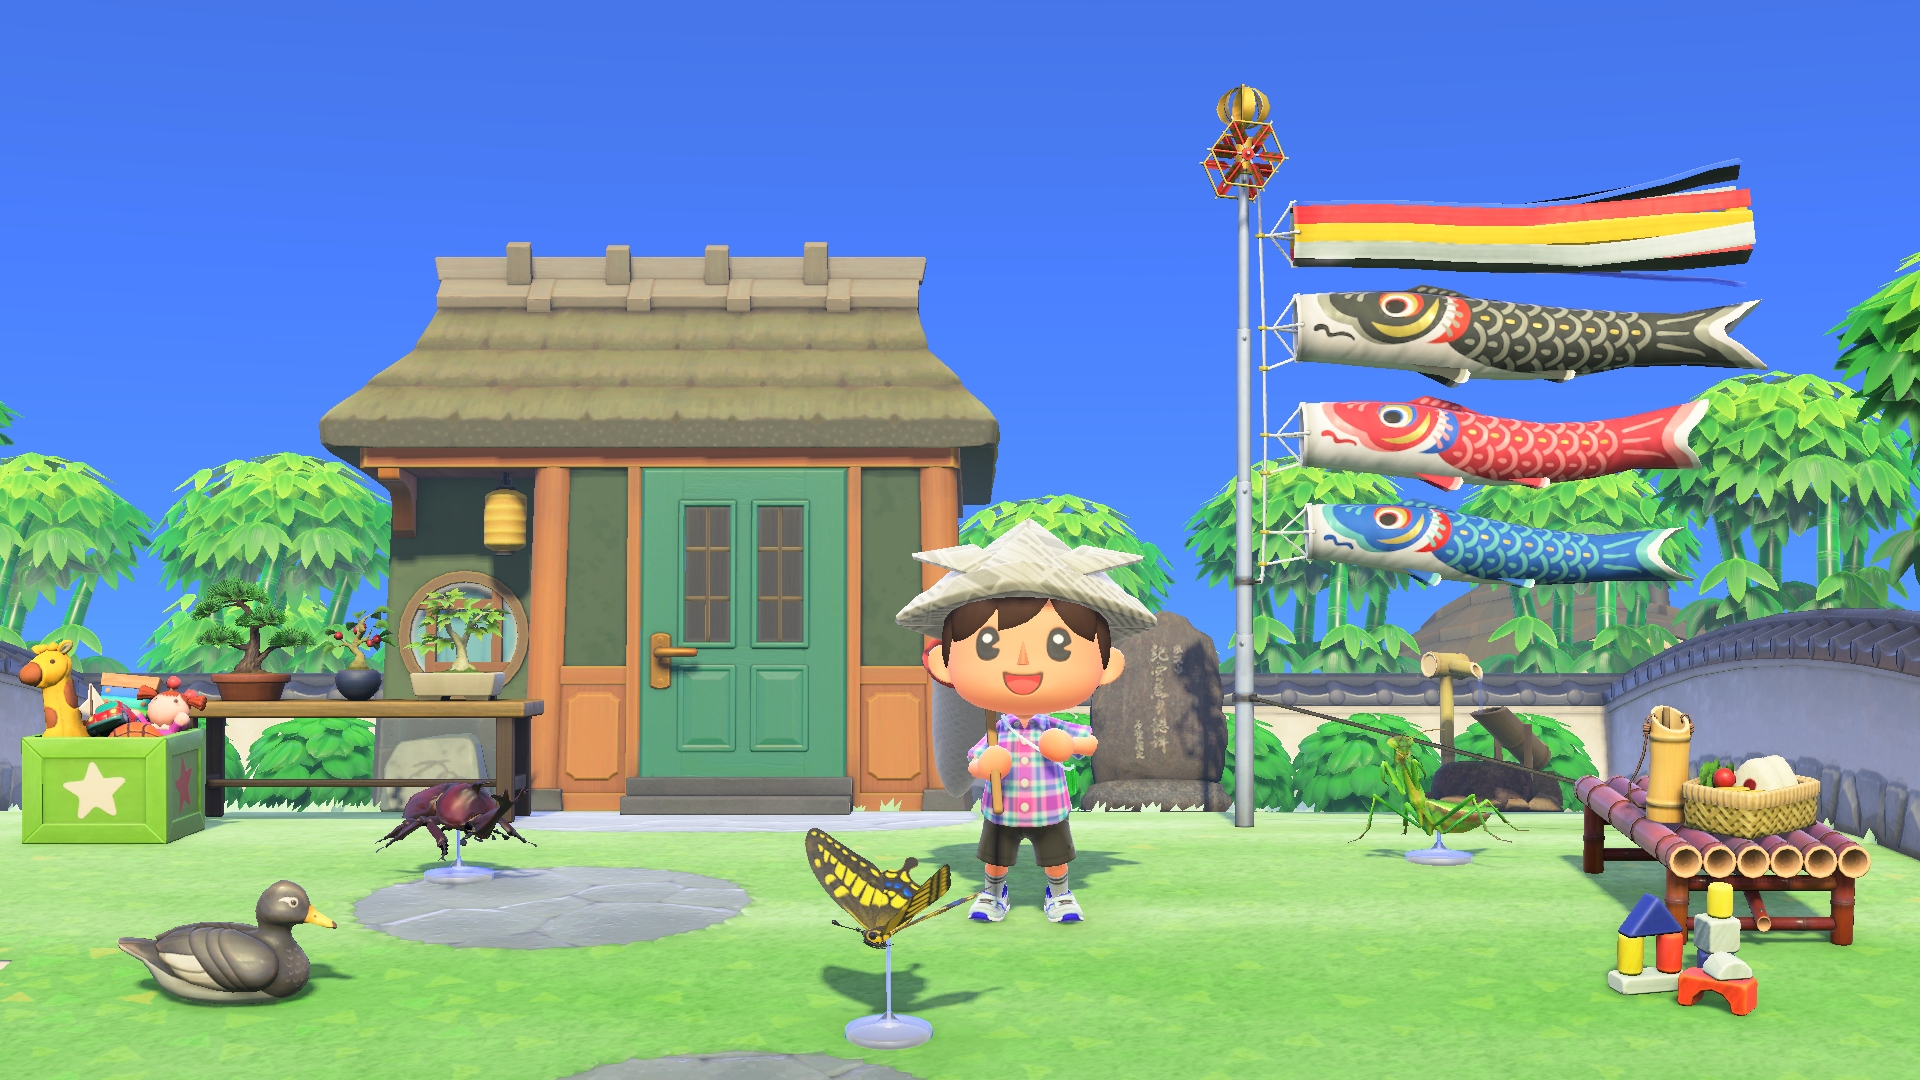 Nope What Is This Mysterious New Villager House In The Animal Crossing April Update Screenshots Animal Crossing World